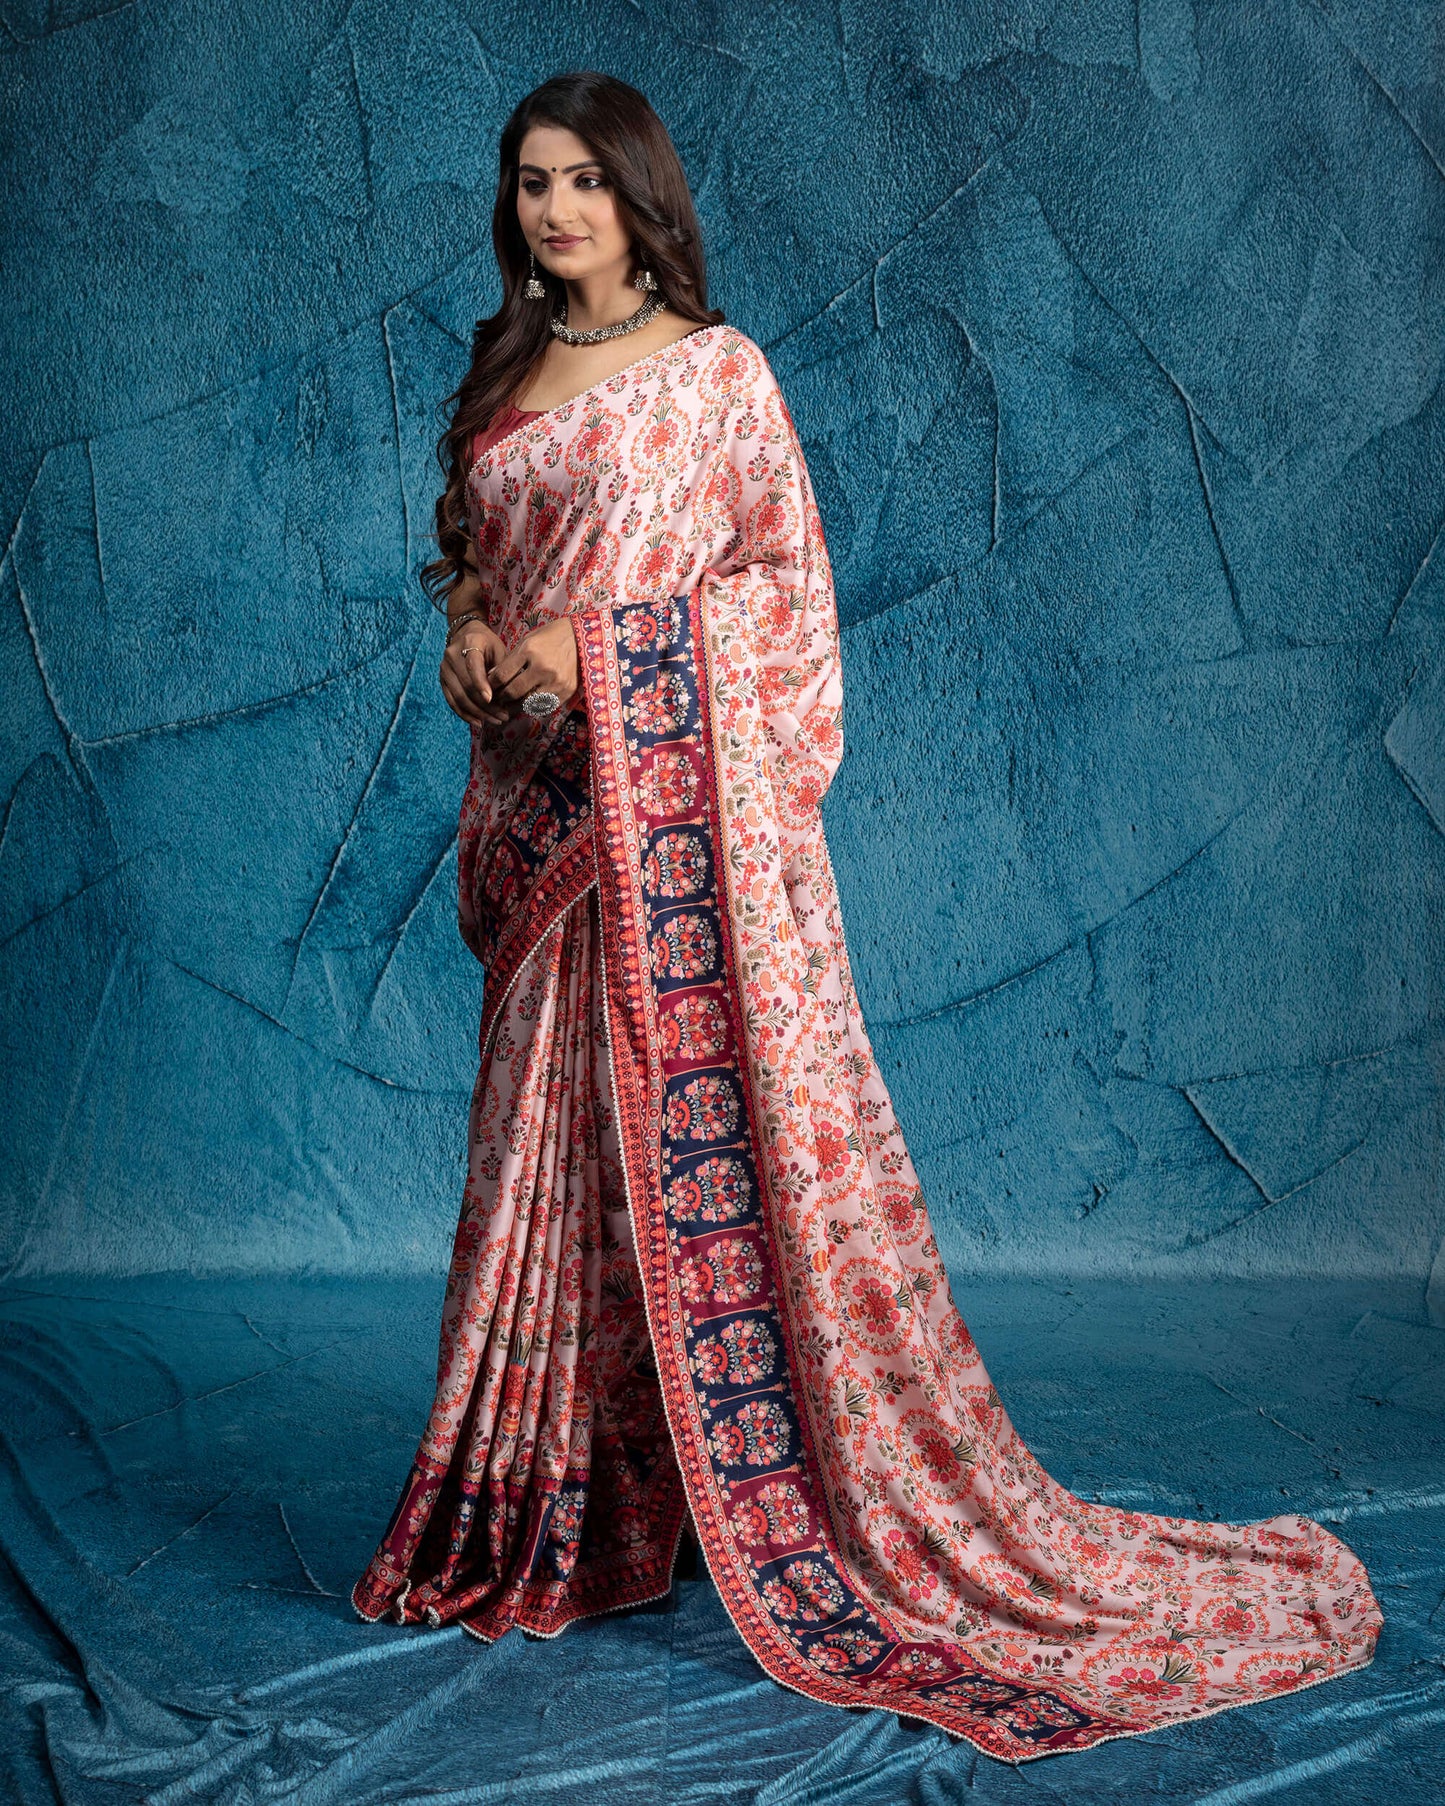 Red And Salmon Peach Floral Pattern Digital Print Muslin Saree With Pearl Work Lace Border